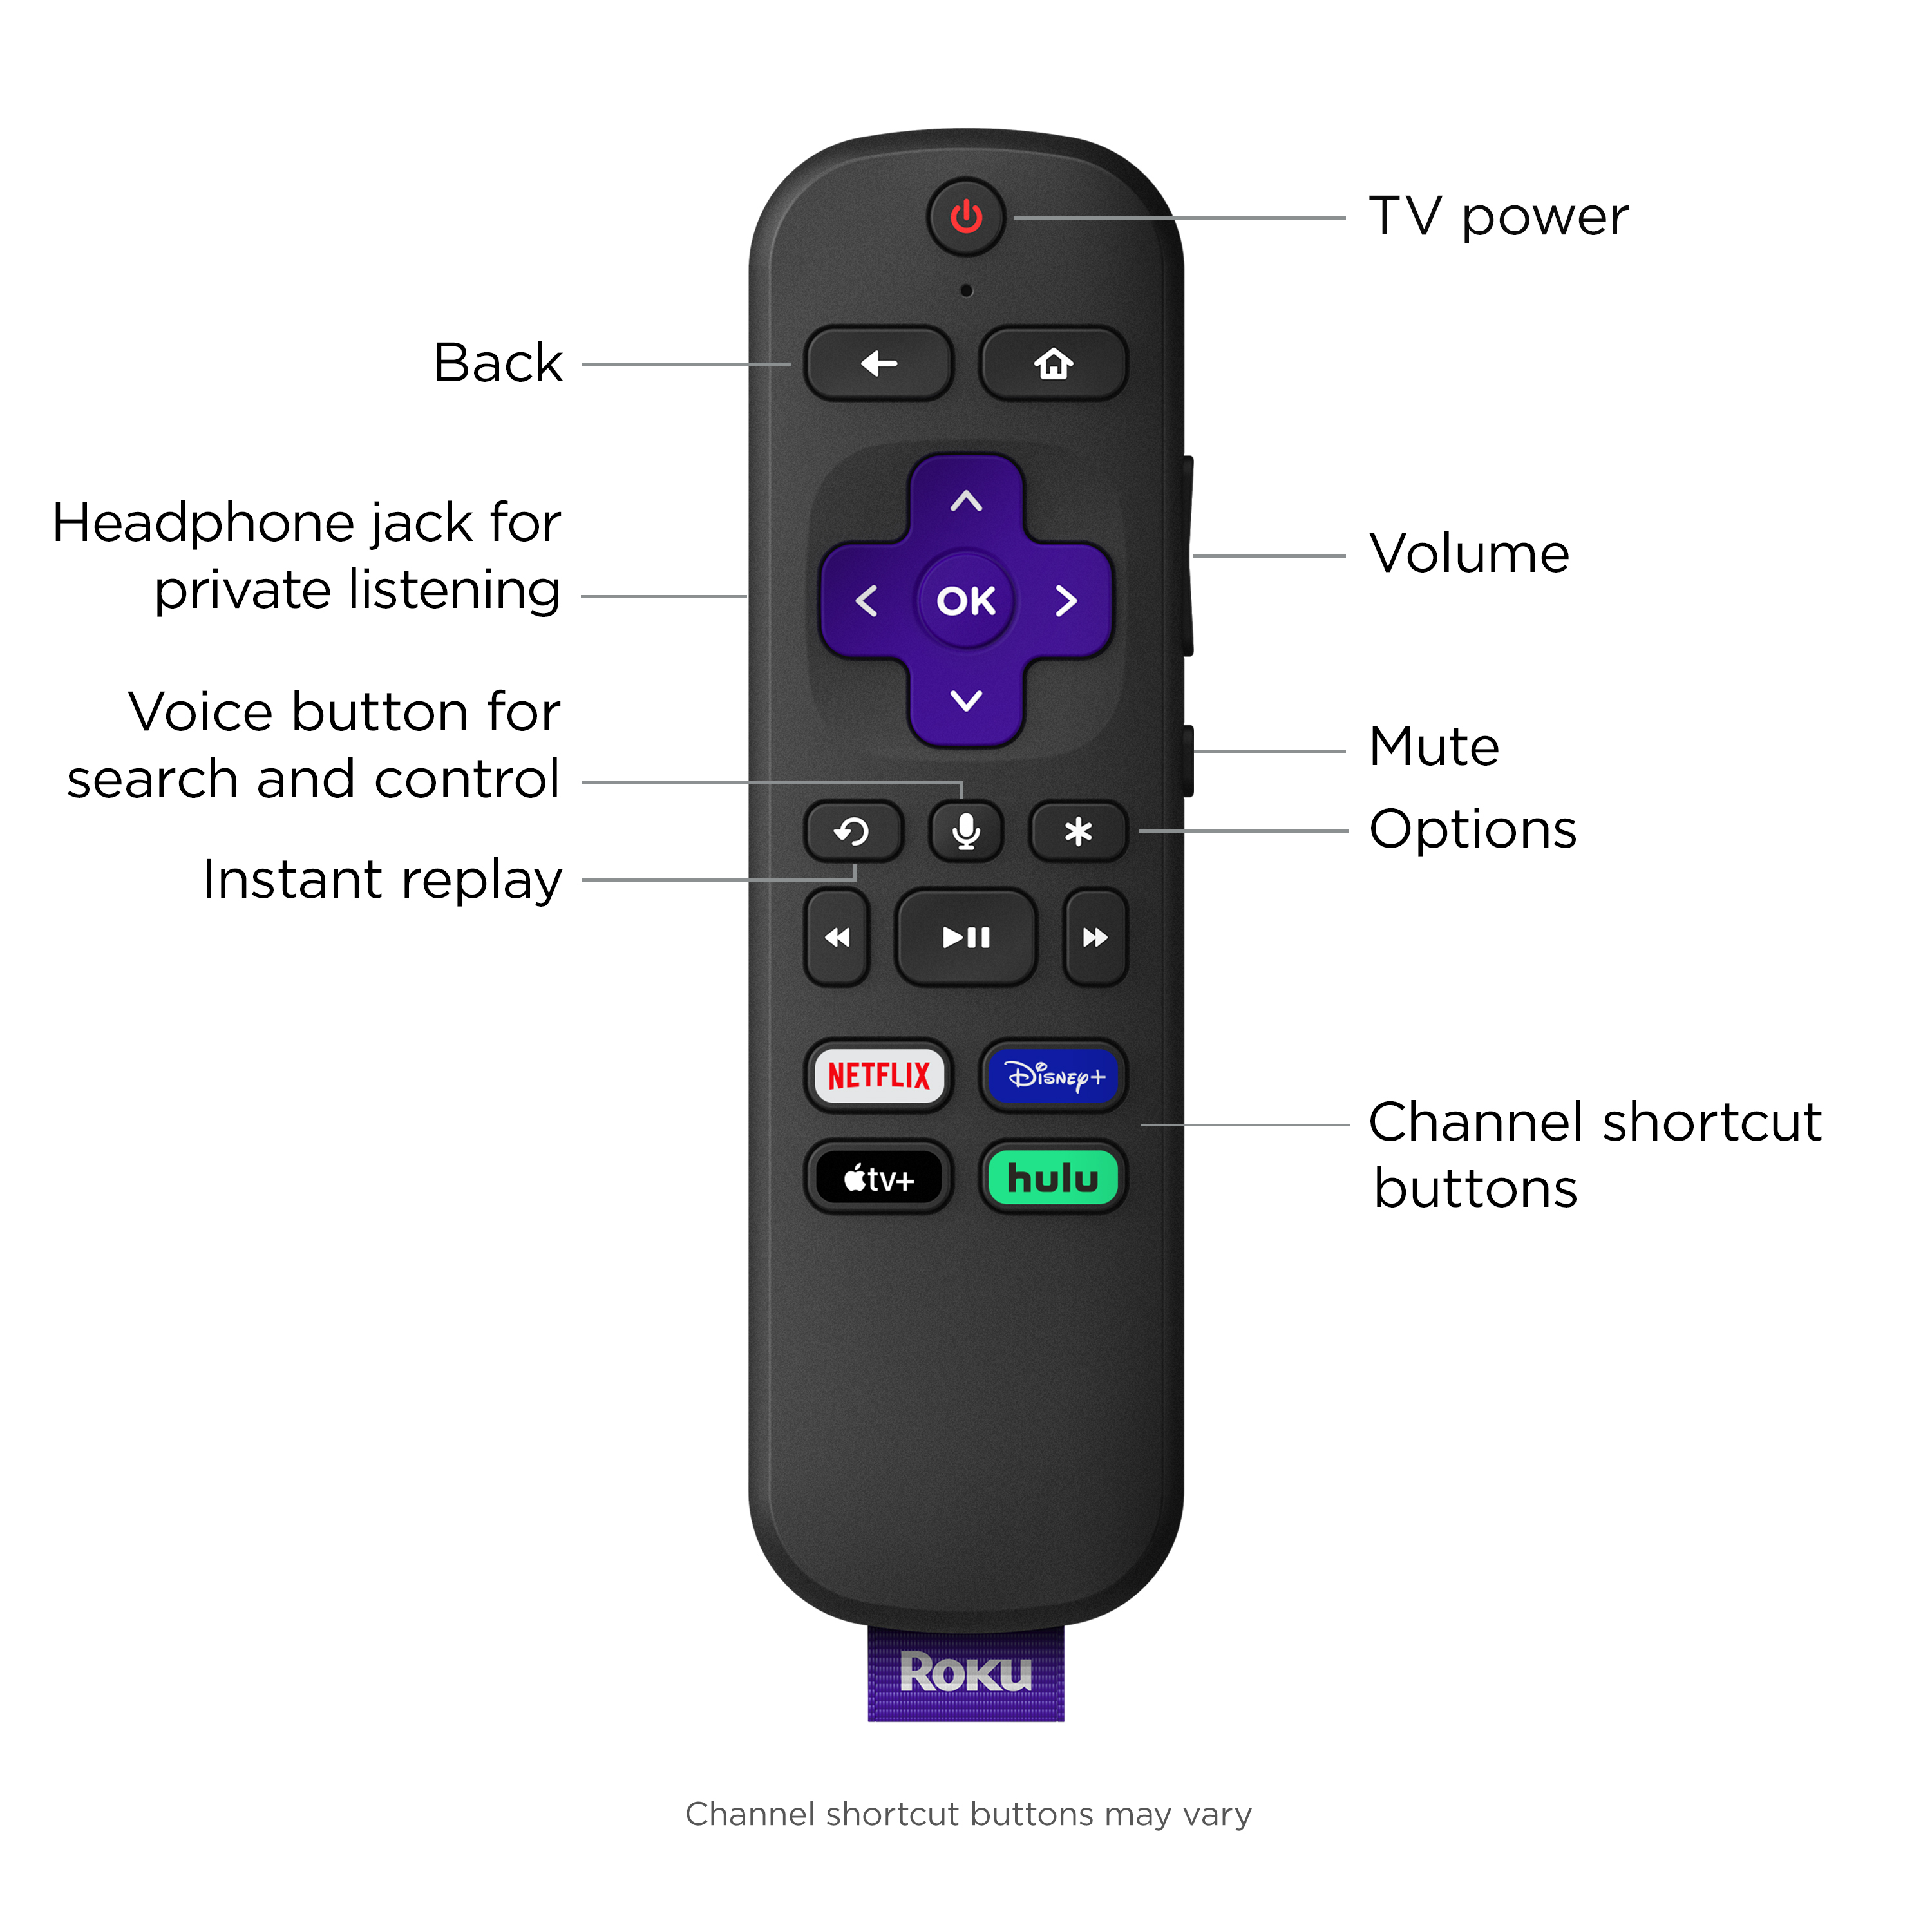 Roku Ultra LT 2019 HD/4K/HDR Streaming Device with Ethernet Port and Roku Voice Remote with Headphone Jack, includes Headphones - image 5 of 12